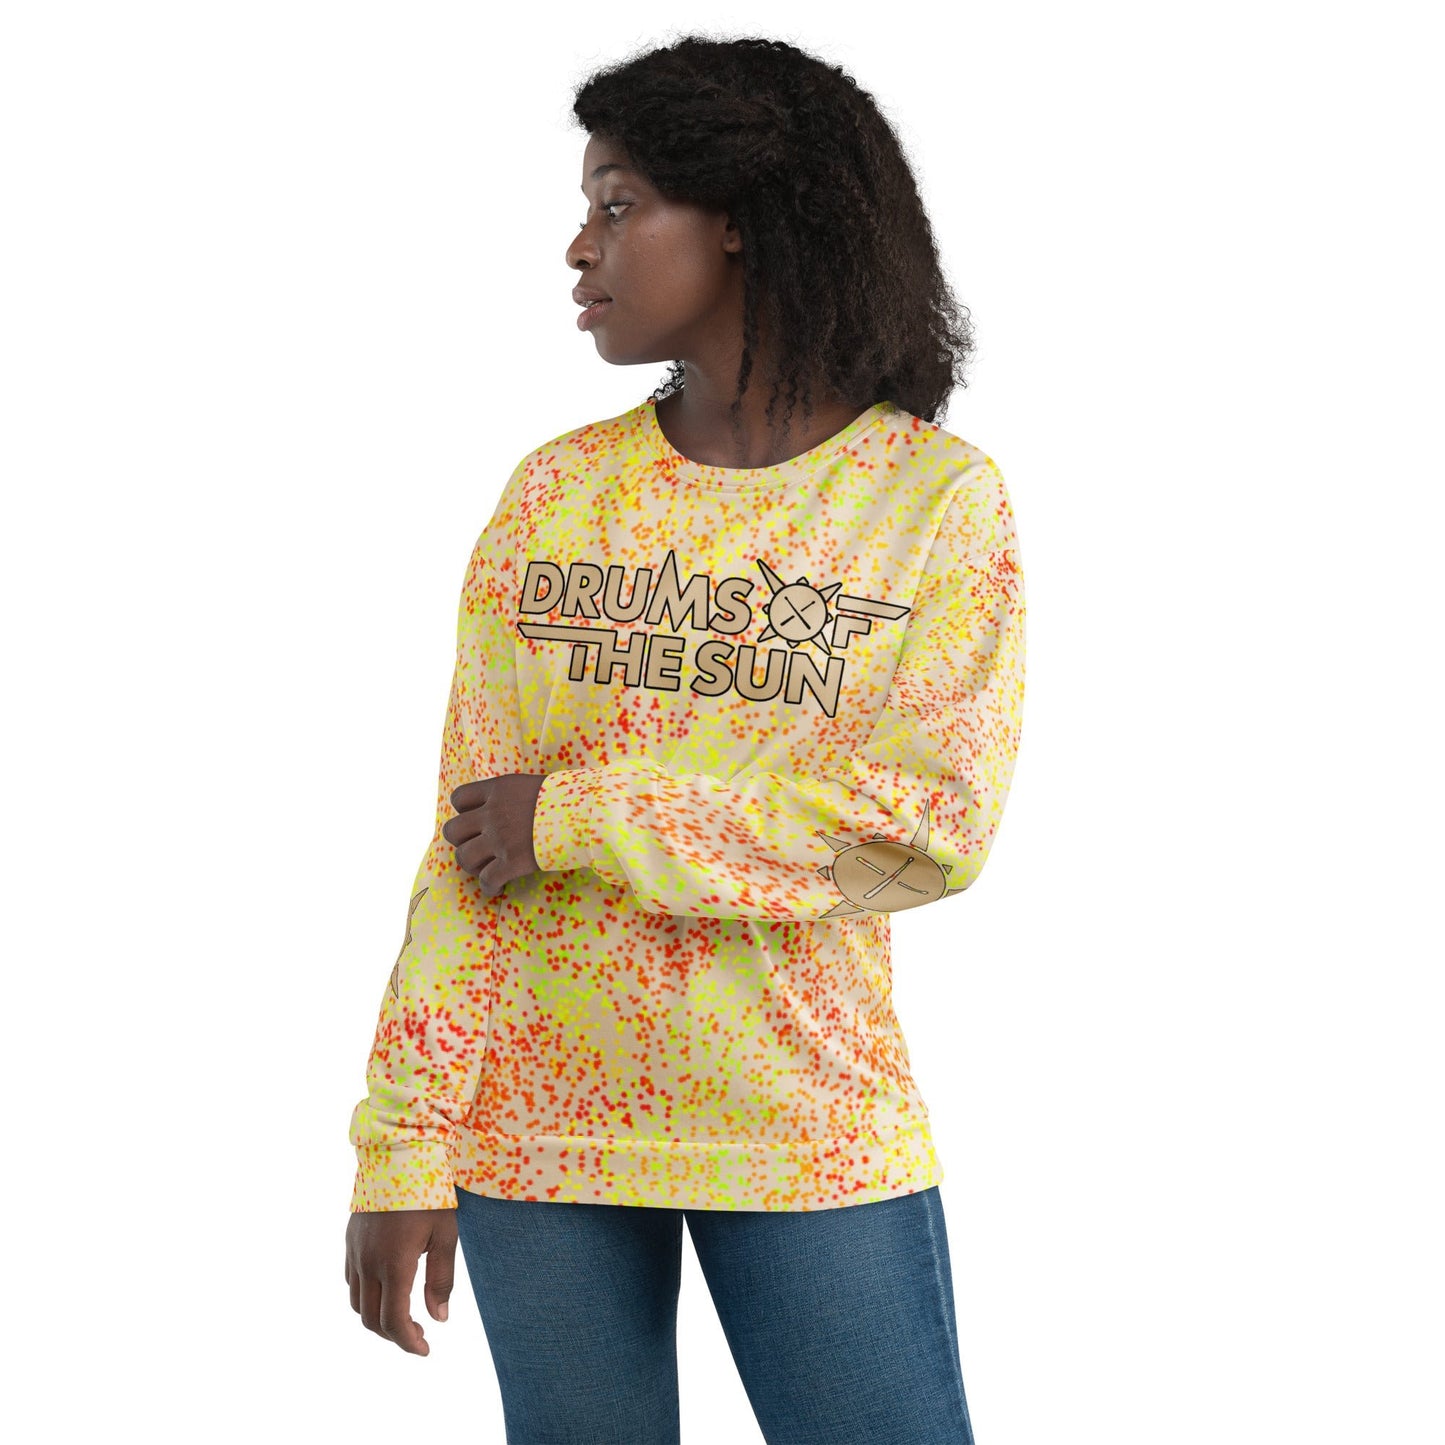 Drums of the Sun Unisex Sweatshirt - BeExtra! Apparel & More